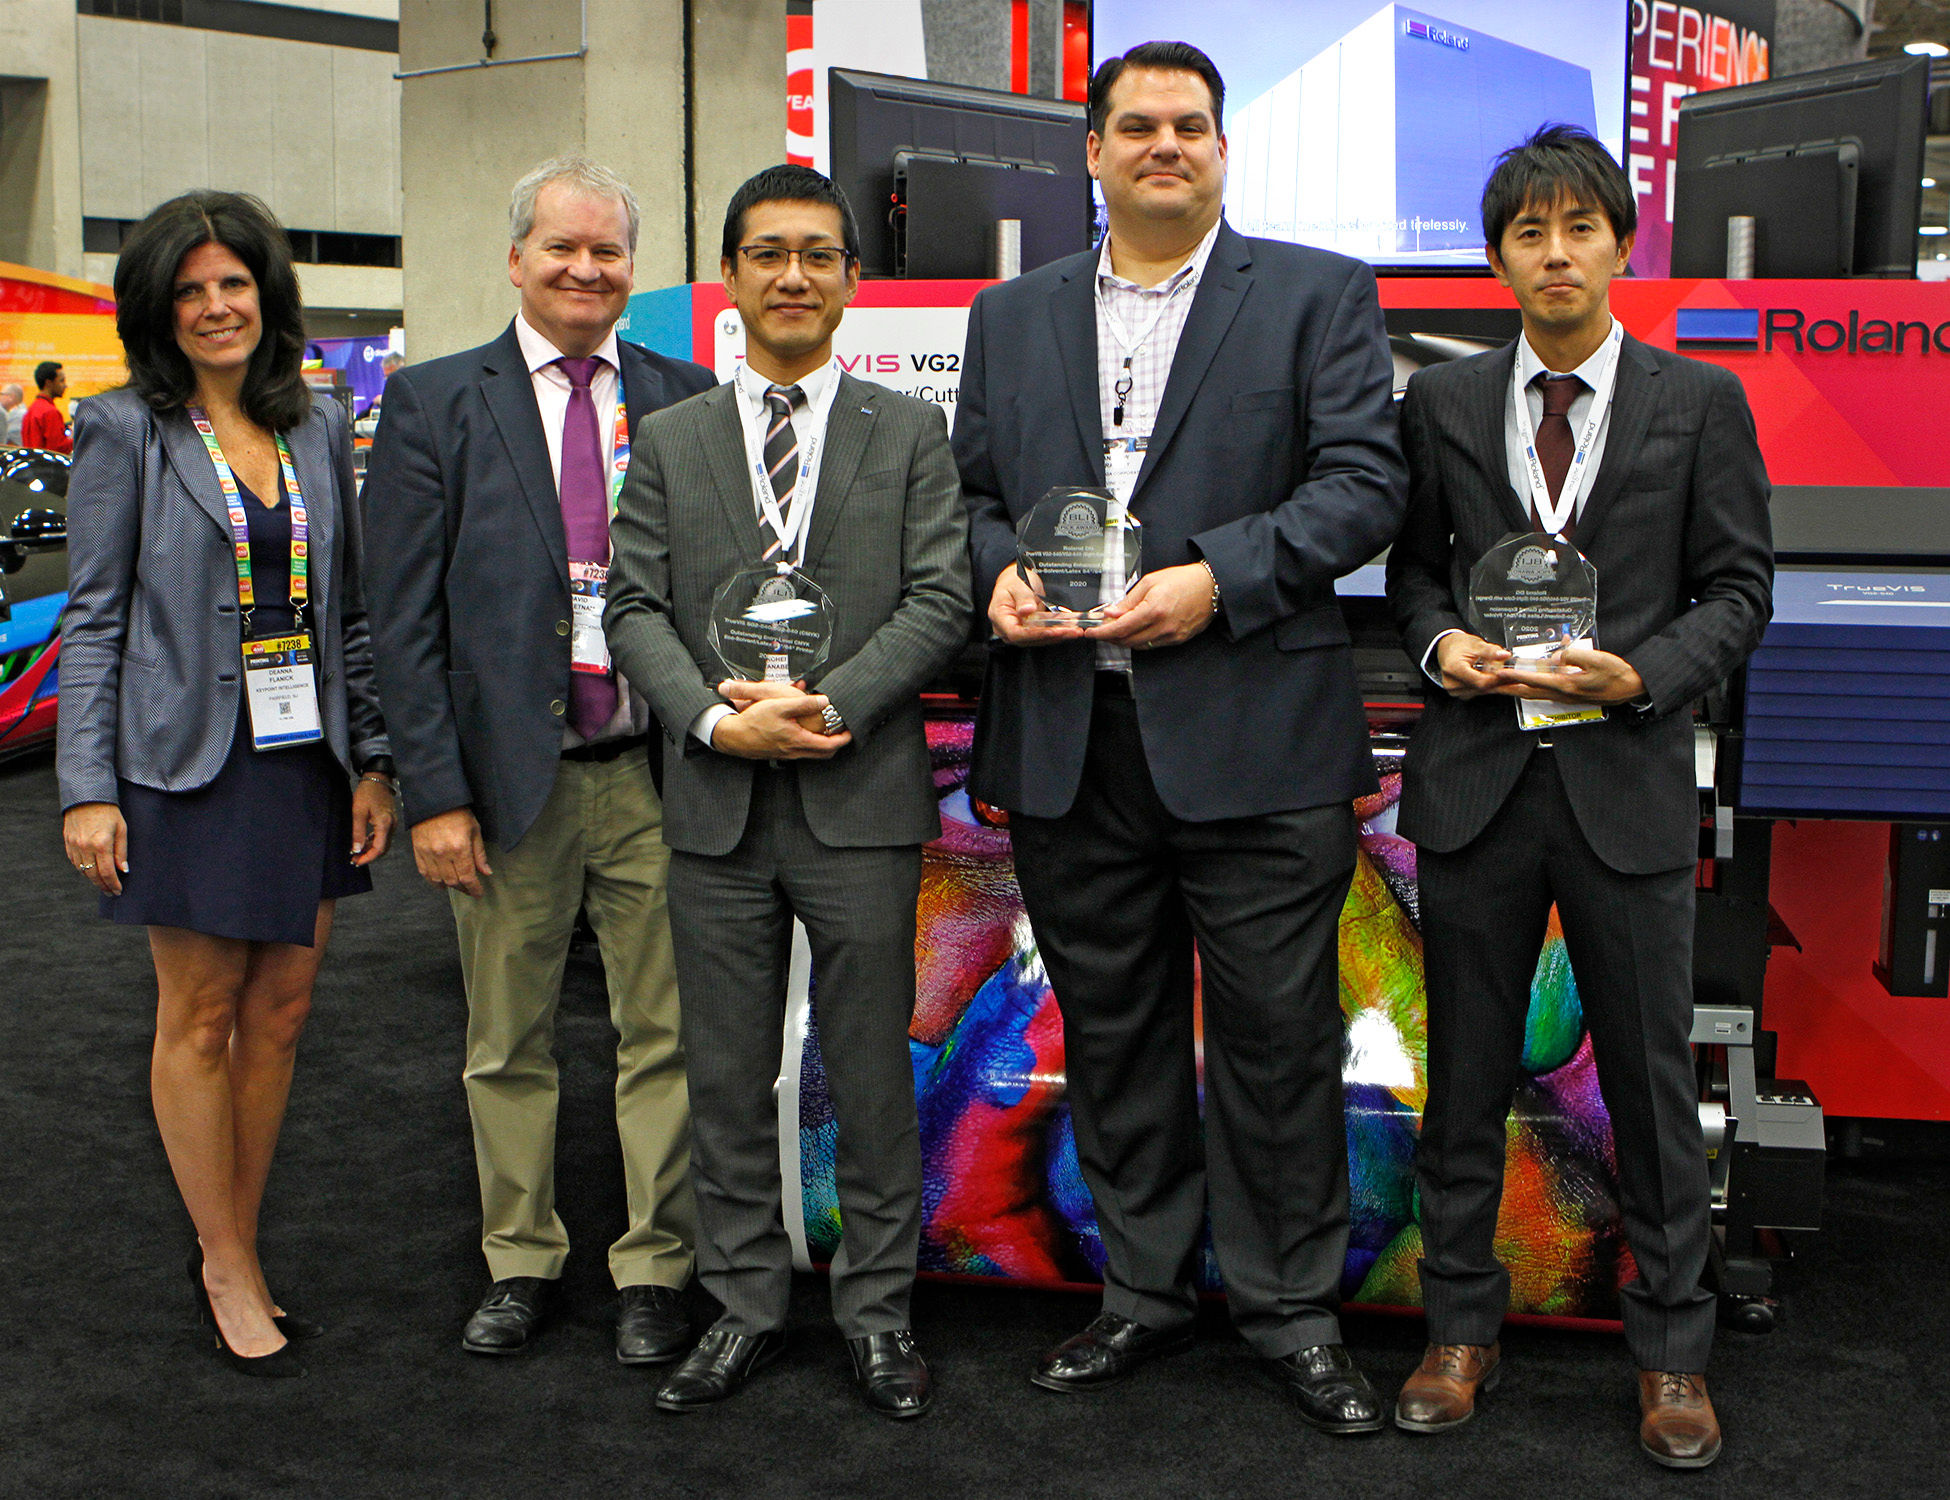 Roland DG receives three 2020 Buyers Lab "Pick Awards" for its newest TrueVIS series printer/cutters at PRINTING United 2019 in Dallas.